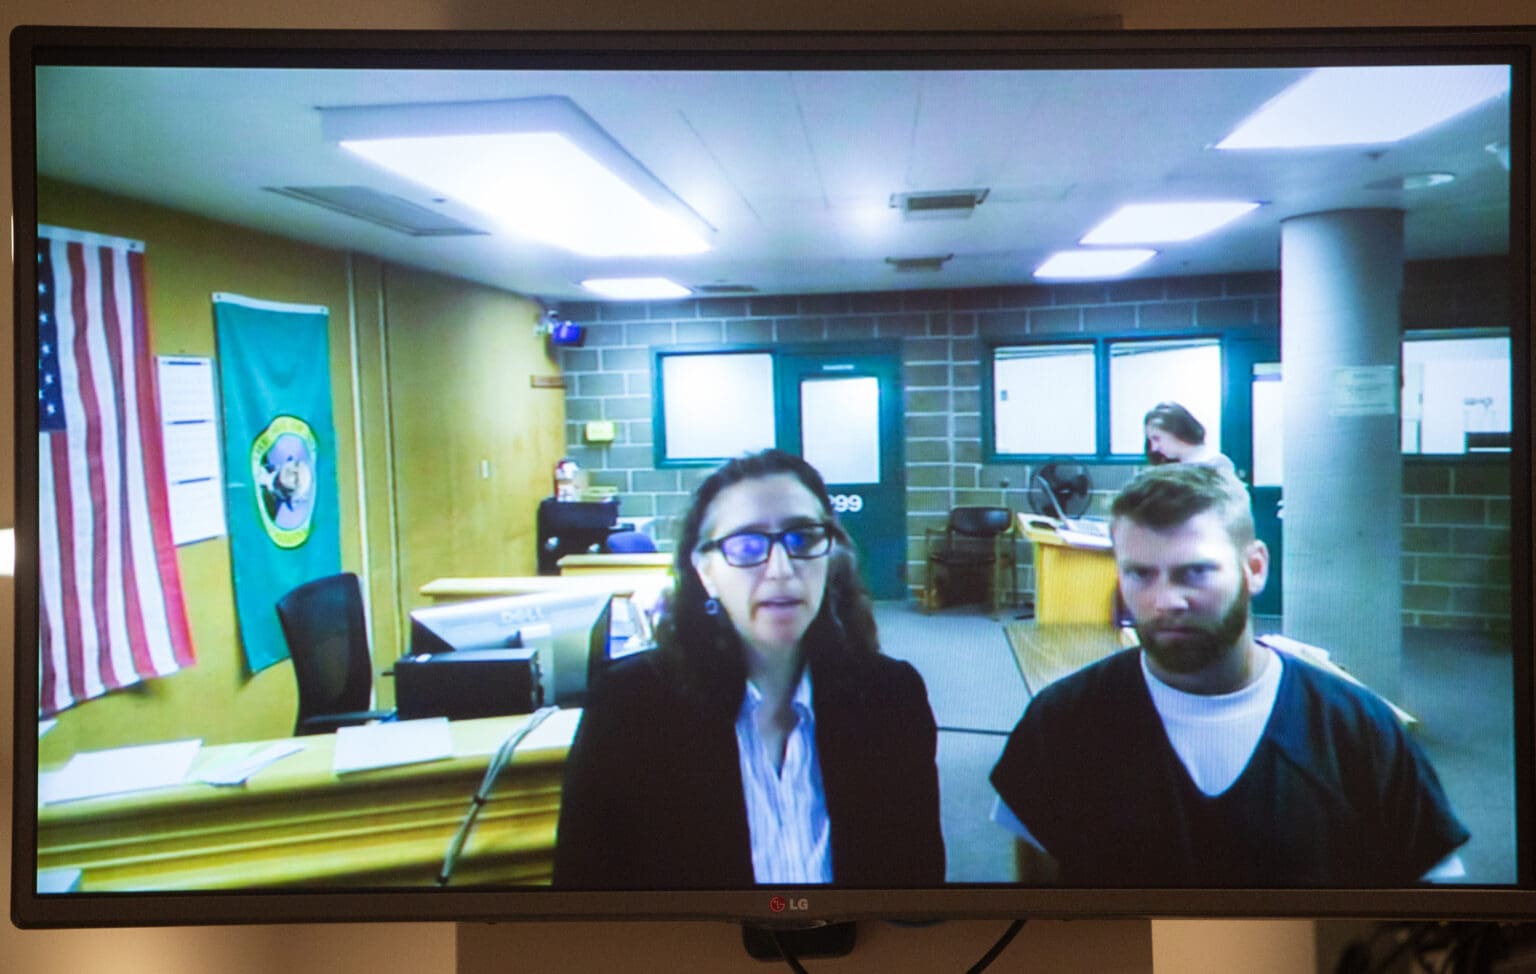 Brian Drake, right, appears for a hearing in a telecast from the Whatcom County Jail next to a helper speaking on his behalf.